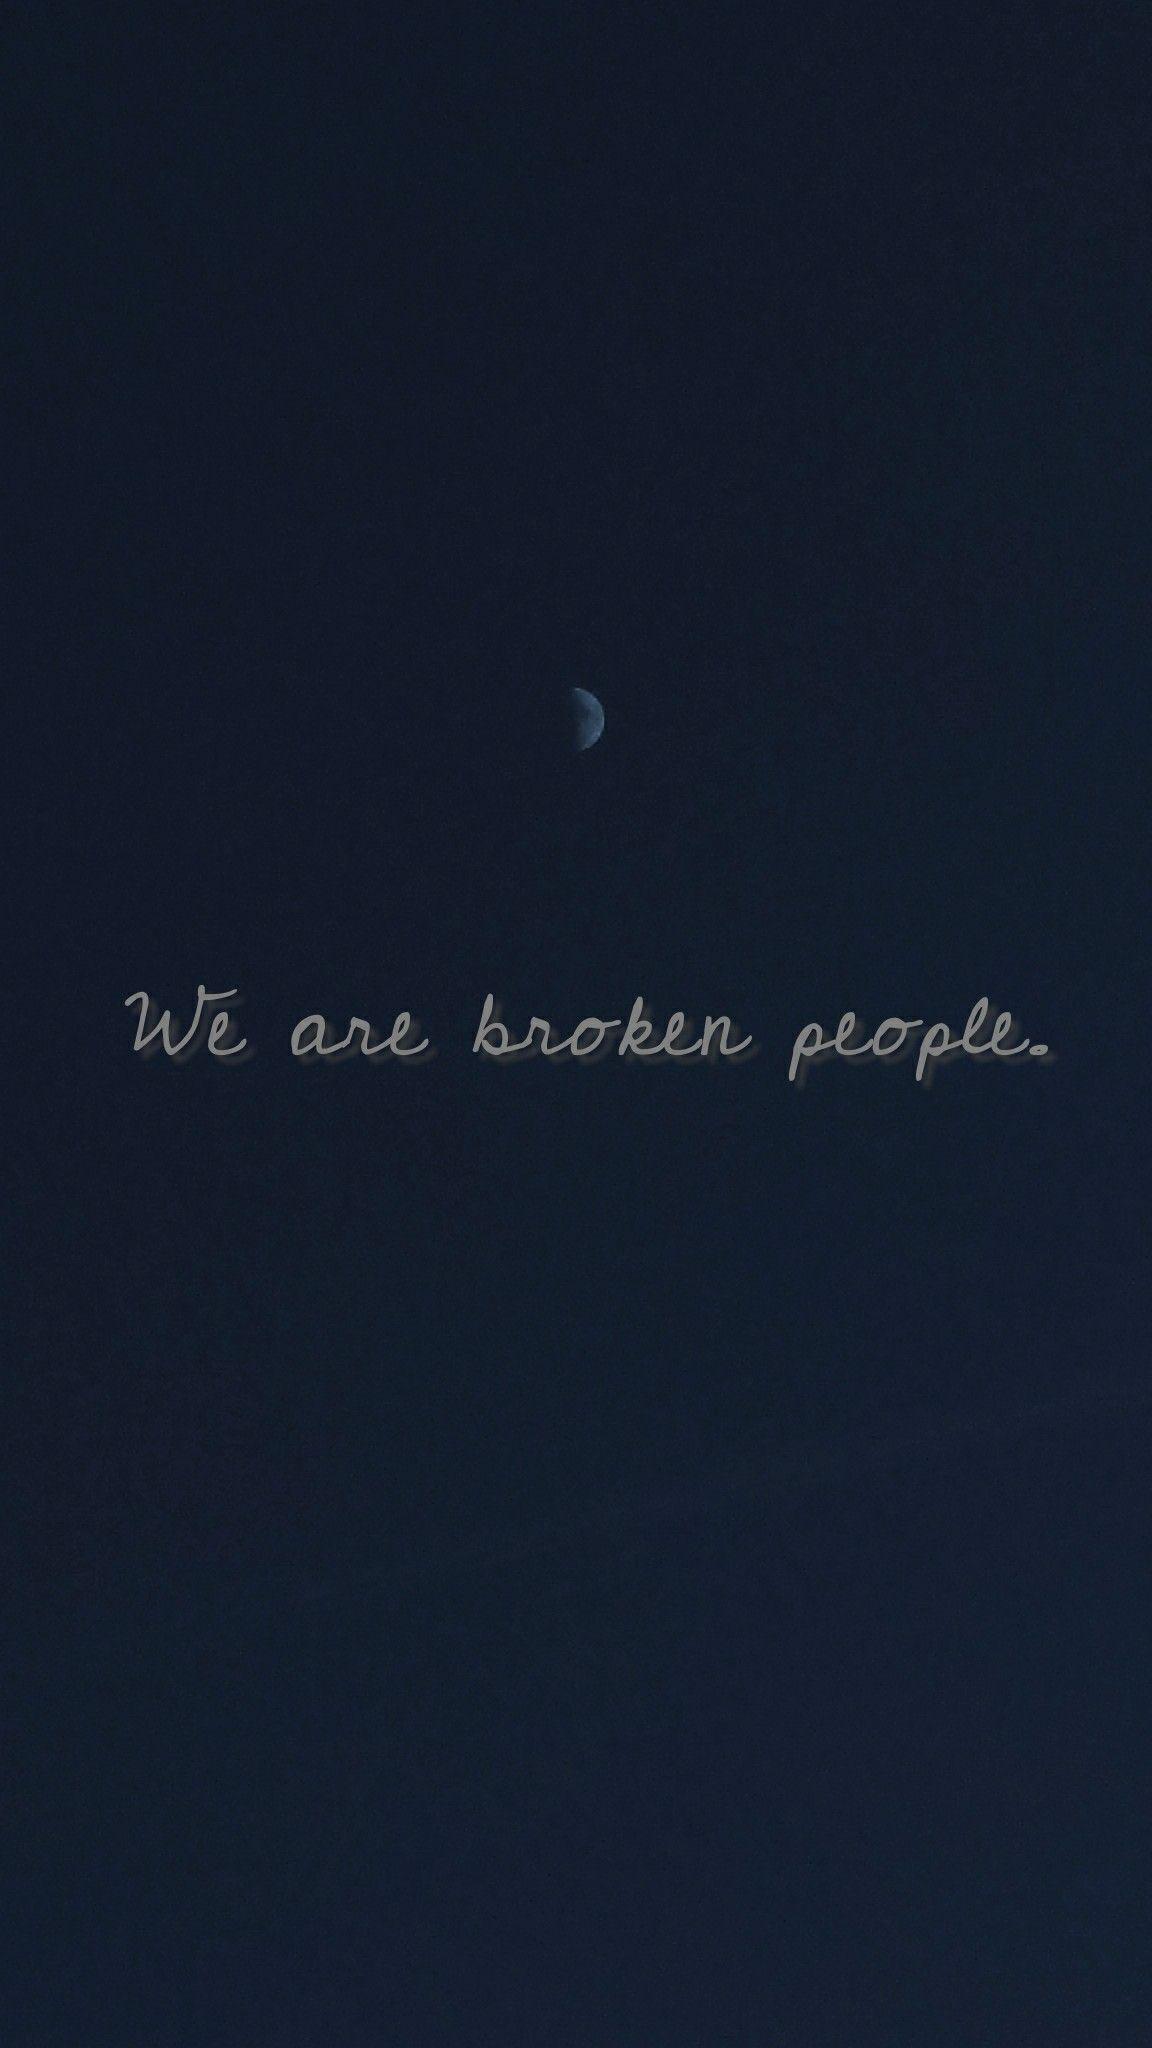 We are broken people. - Android